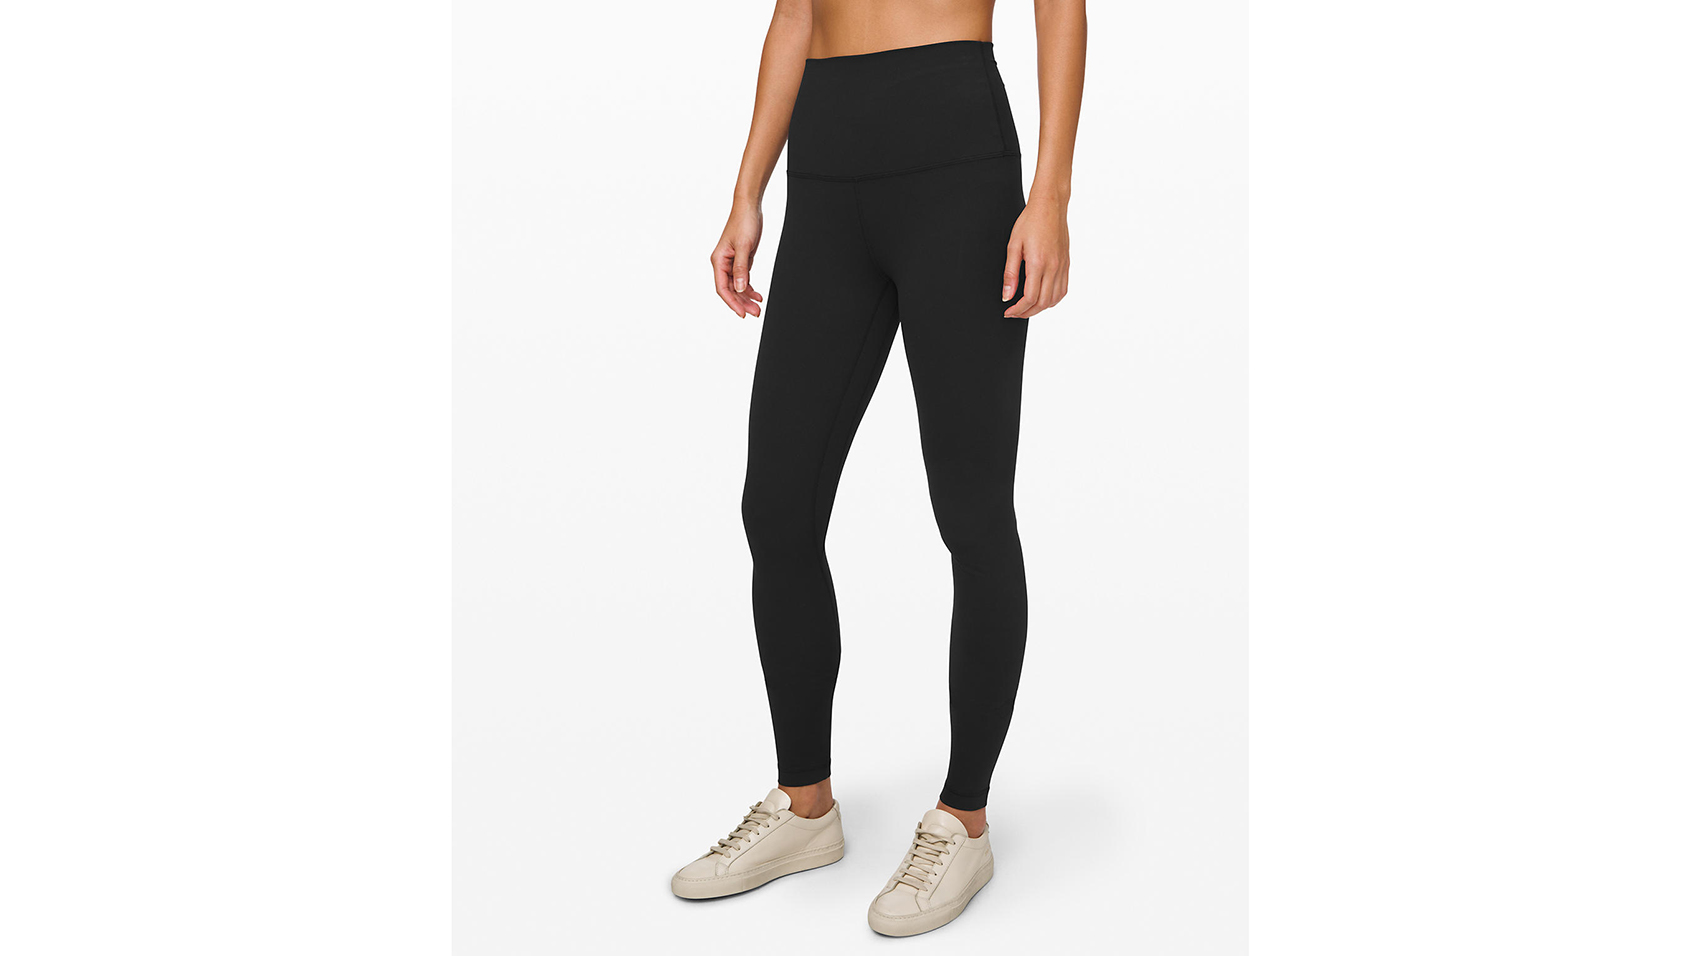 how much does it cost lululemon to make one pair of leggings